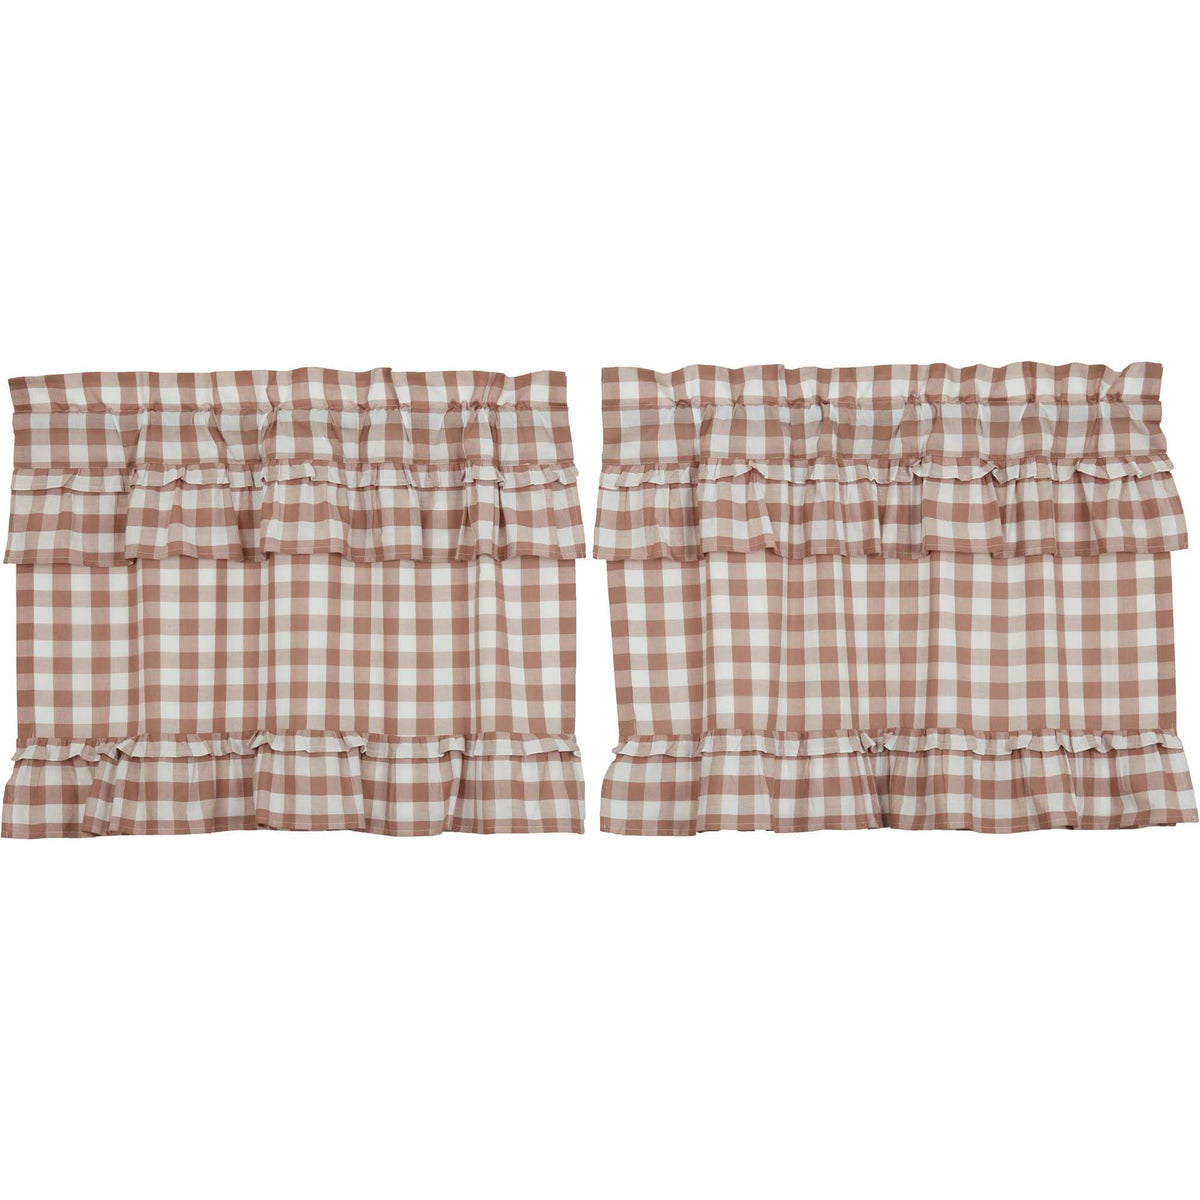 April & Olive Annie Buffalo Portabella Check Ruffled Tier Set of 2 L24xW36 By VHC Brands